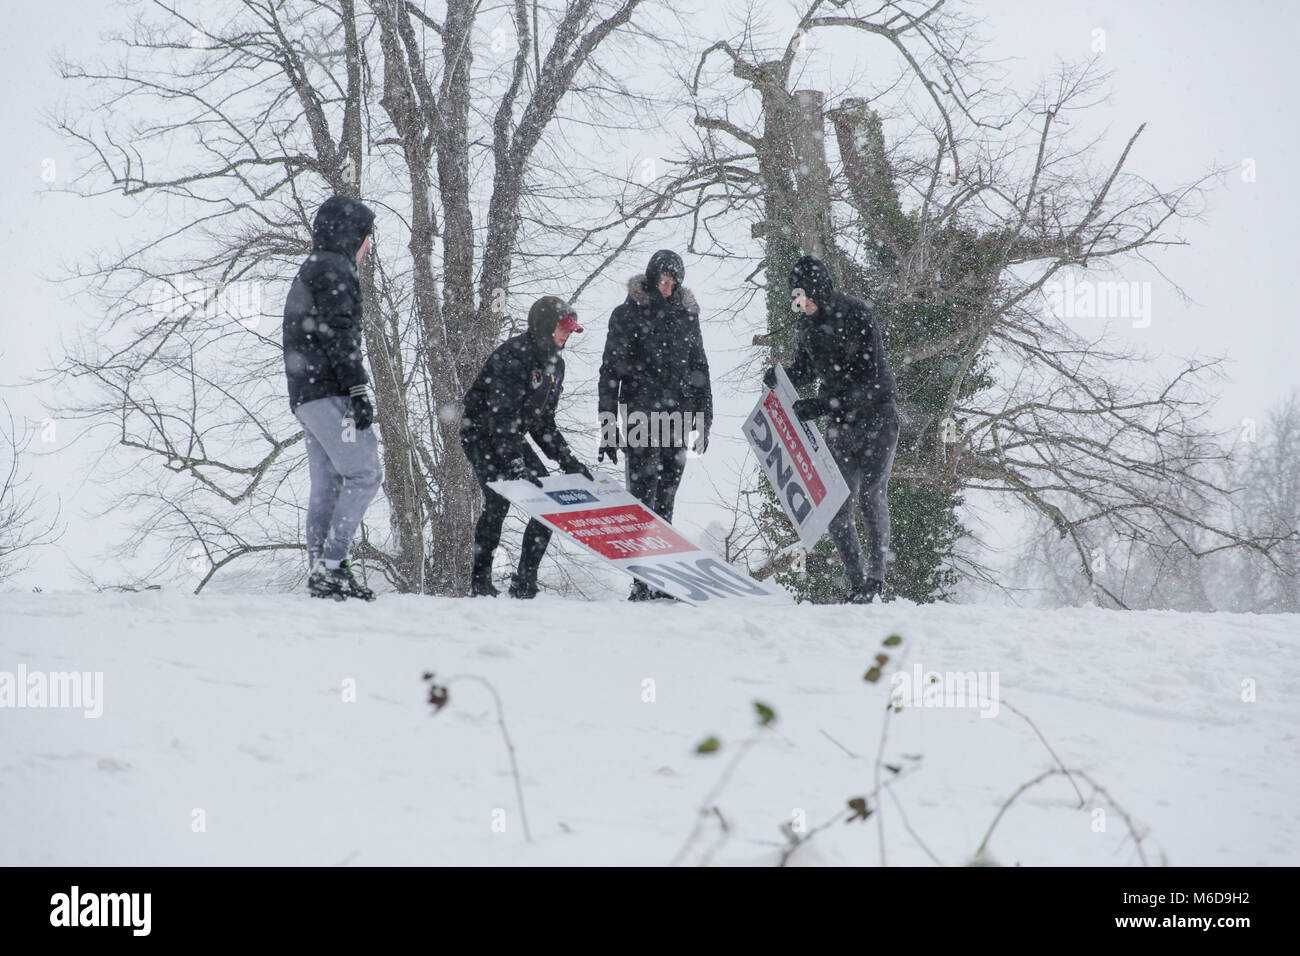 Celbridge, Kildare, Ireland. 02 Mar 2018: Teenagers taking advantage of the snowy weather having fun  sliding down the hill. Beast from the east followed by Storm Emma brought snow and high winds paralyzing the country and forcing Met Éireann to issue red warning alert across Ireland. Stock Photo